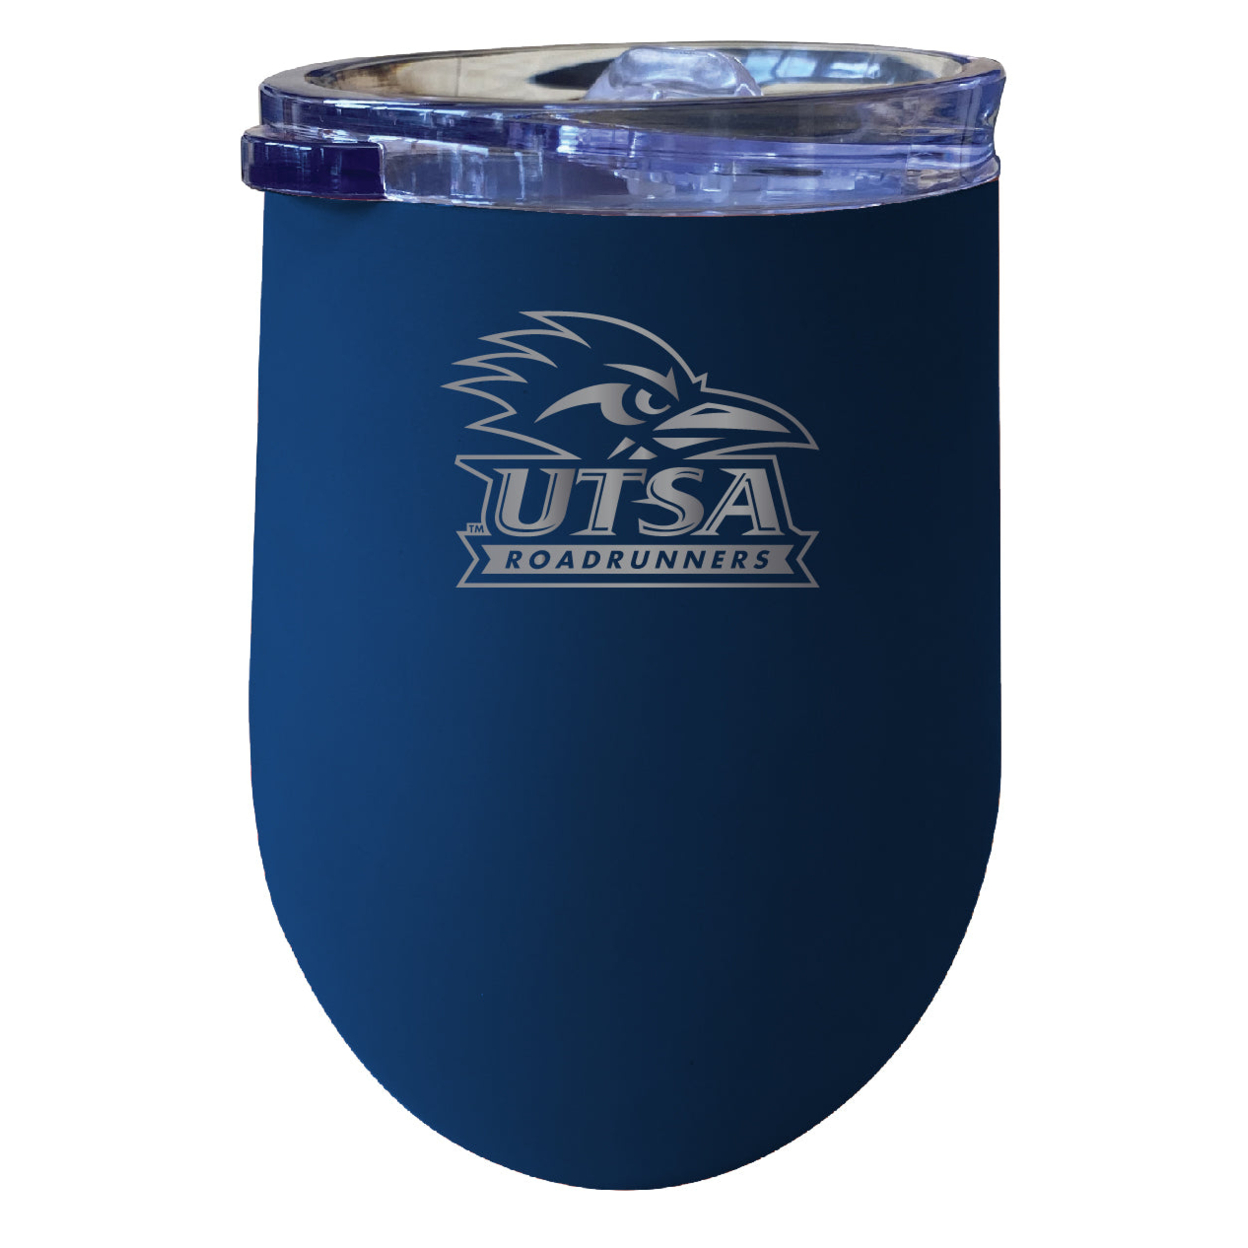 UTSA Road Runners 12 Oz Etched Insulated Wine Stainless Steel Tumbler - Choose Your Color - Black